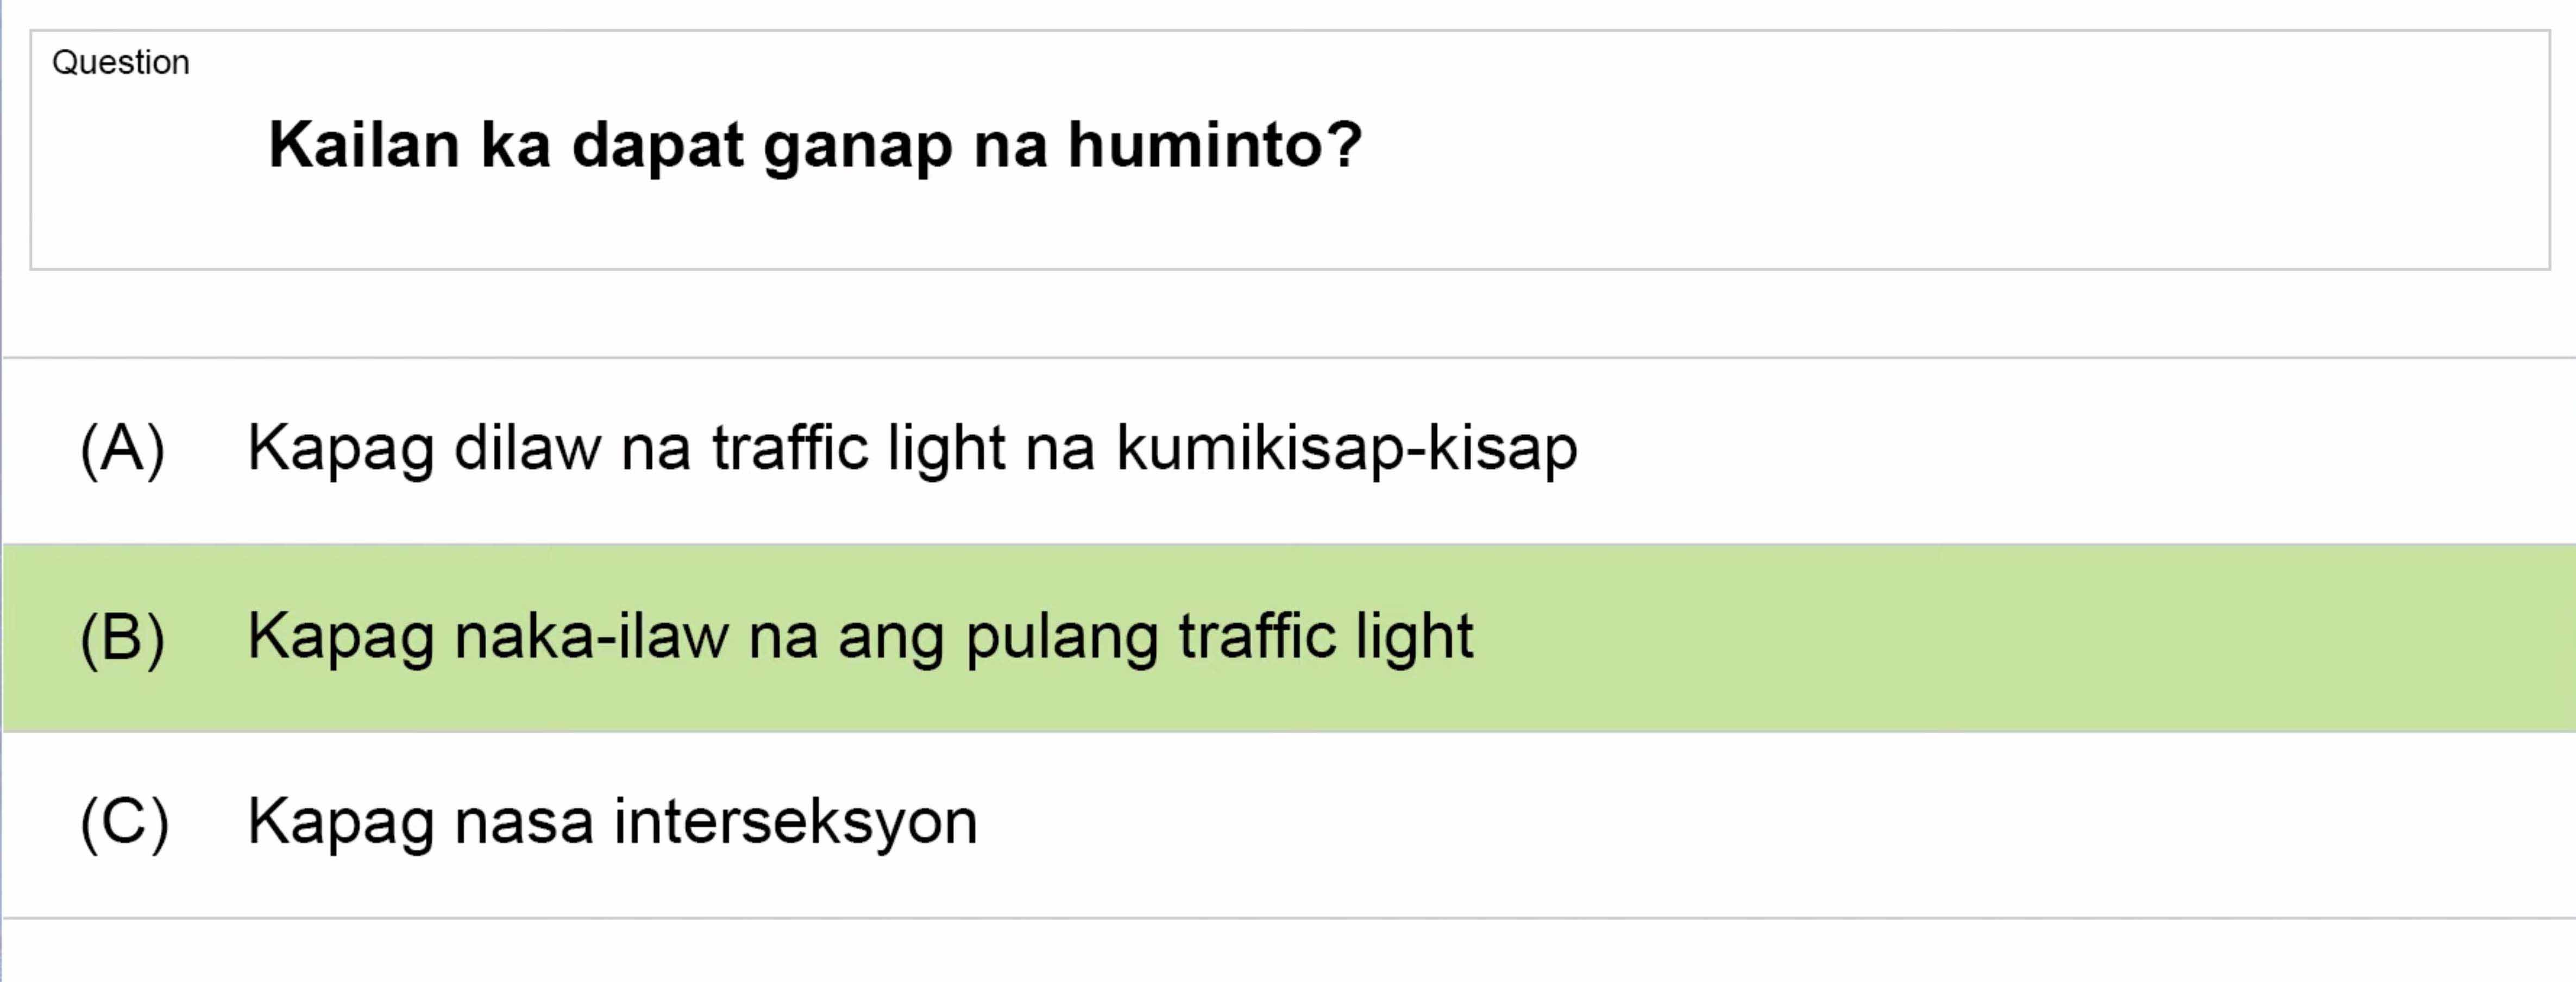 LTO Tagalog non professional exam reviewer light vehicle 1 (9)